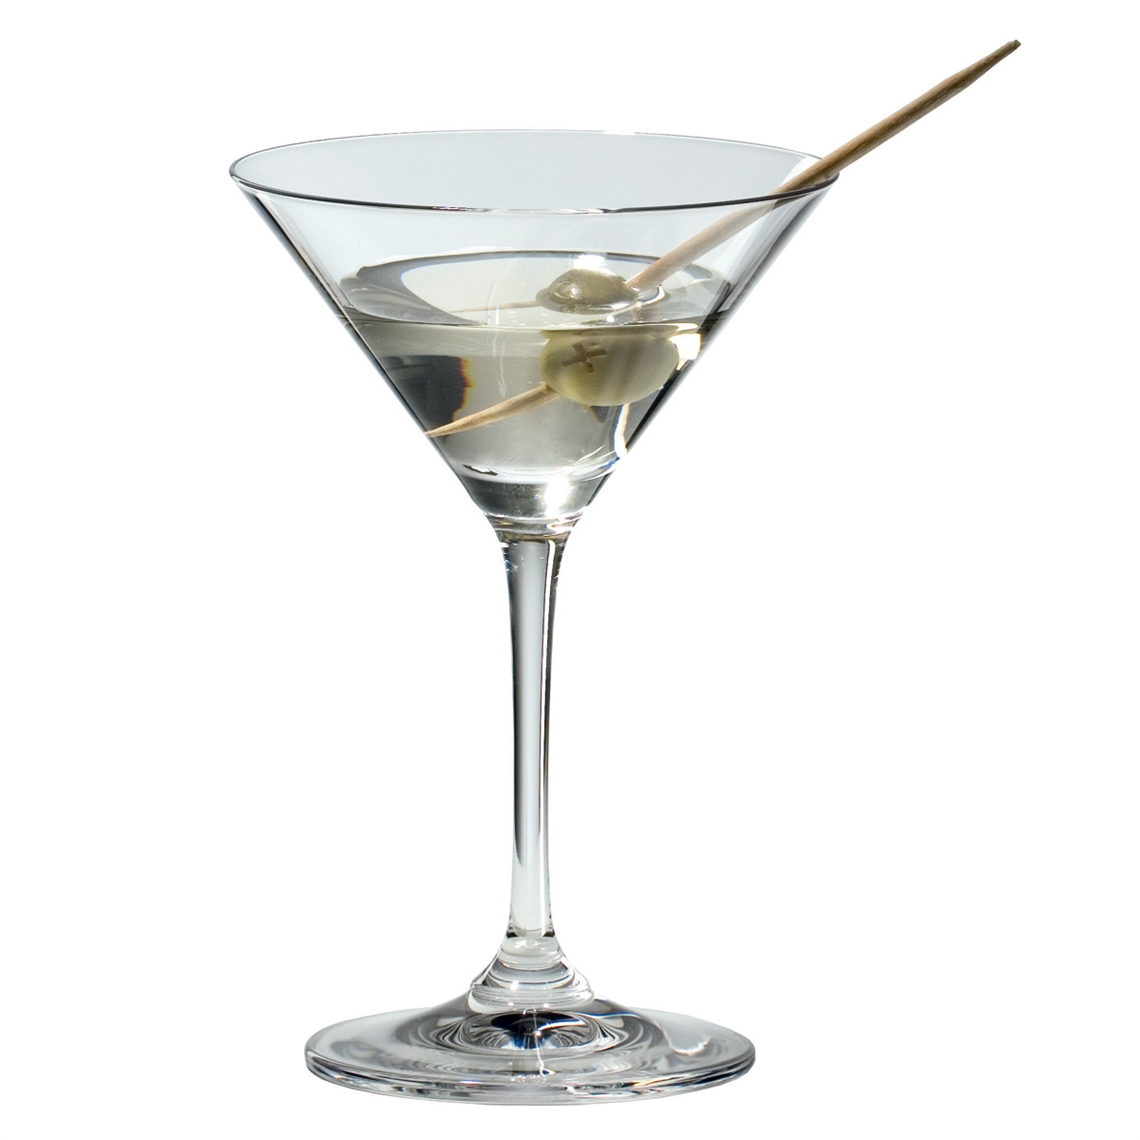 View more wine tasting glasses from our Martini Glasses range